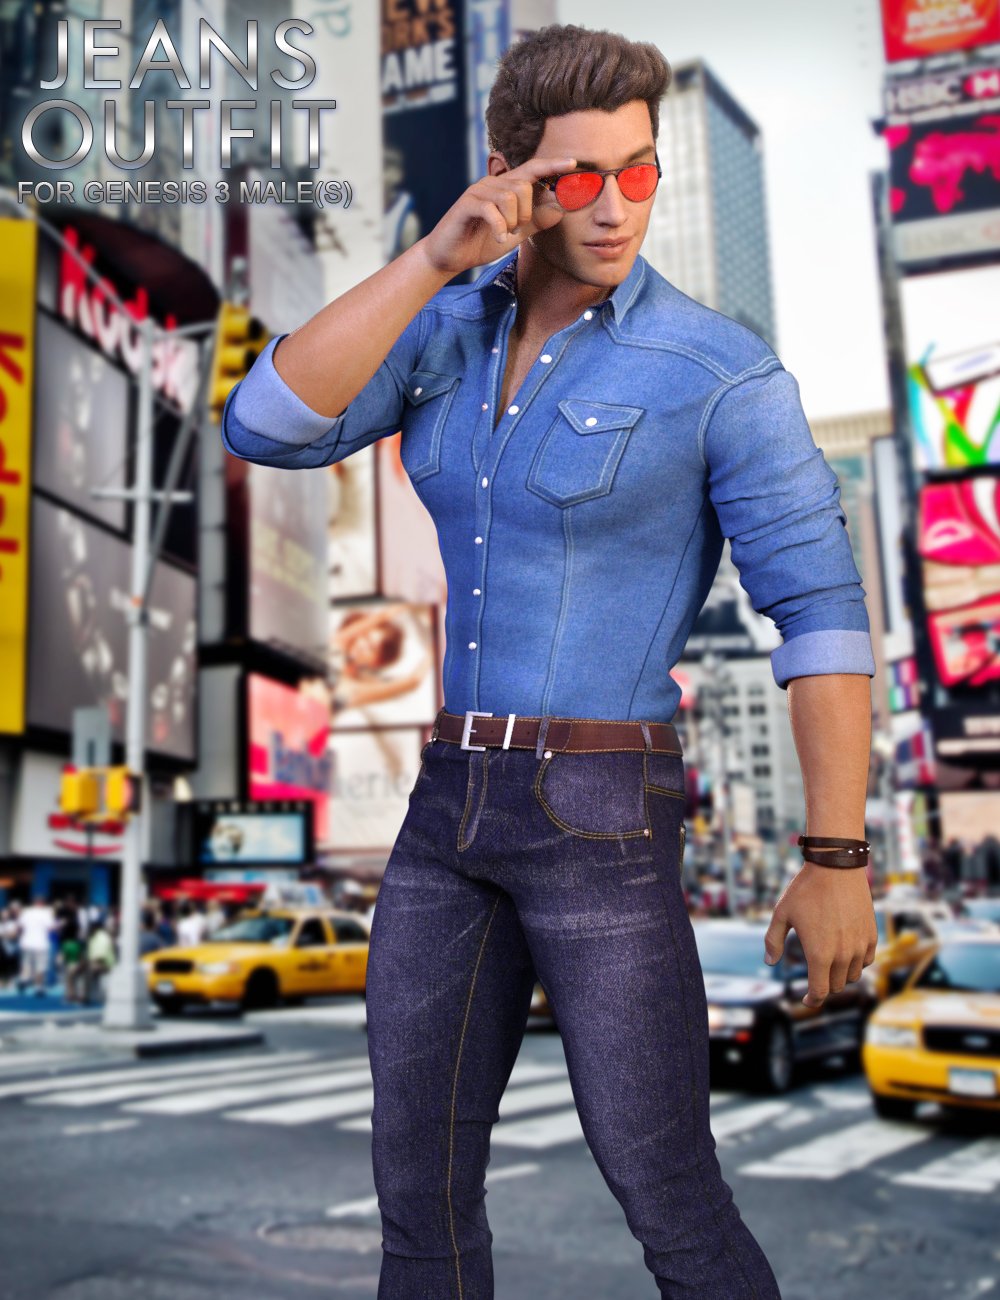 Jeans Outfit for Genesis 3 Male(s) by: Blue Rabbit, 3D Models by Daz 3D